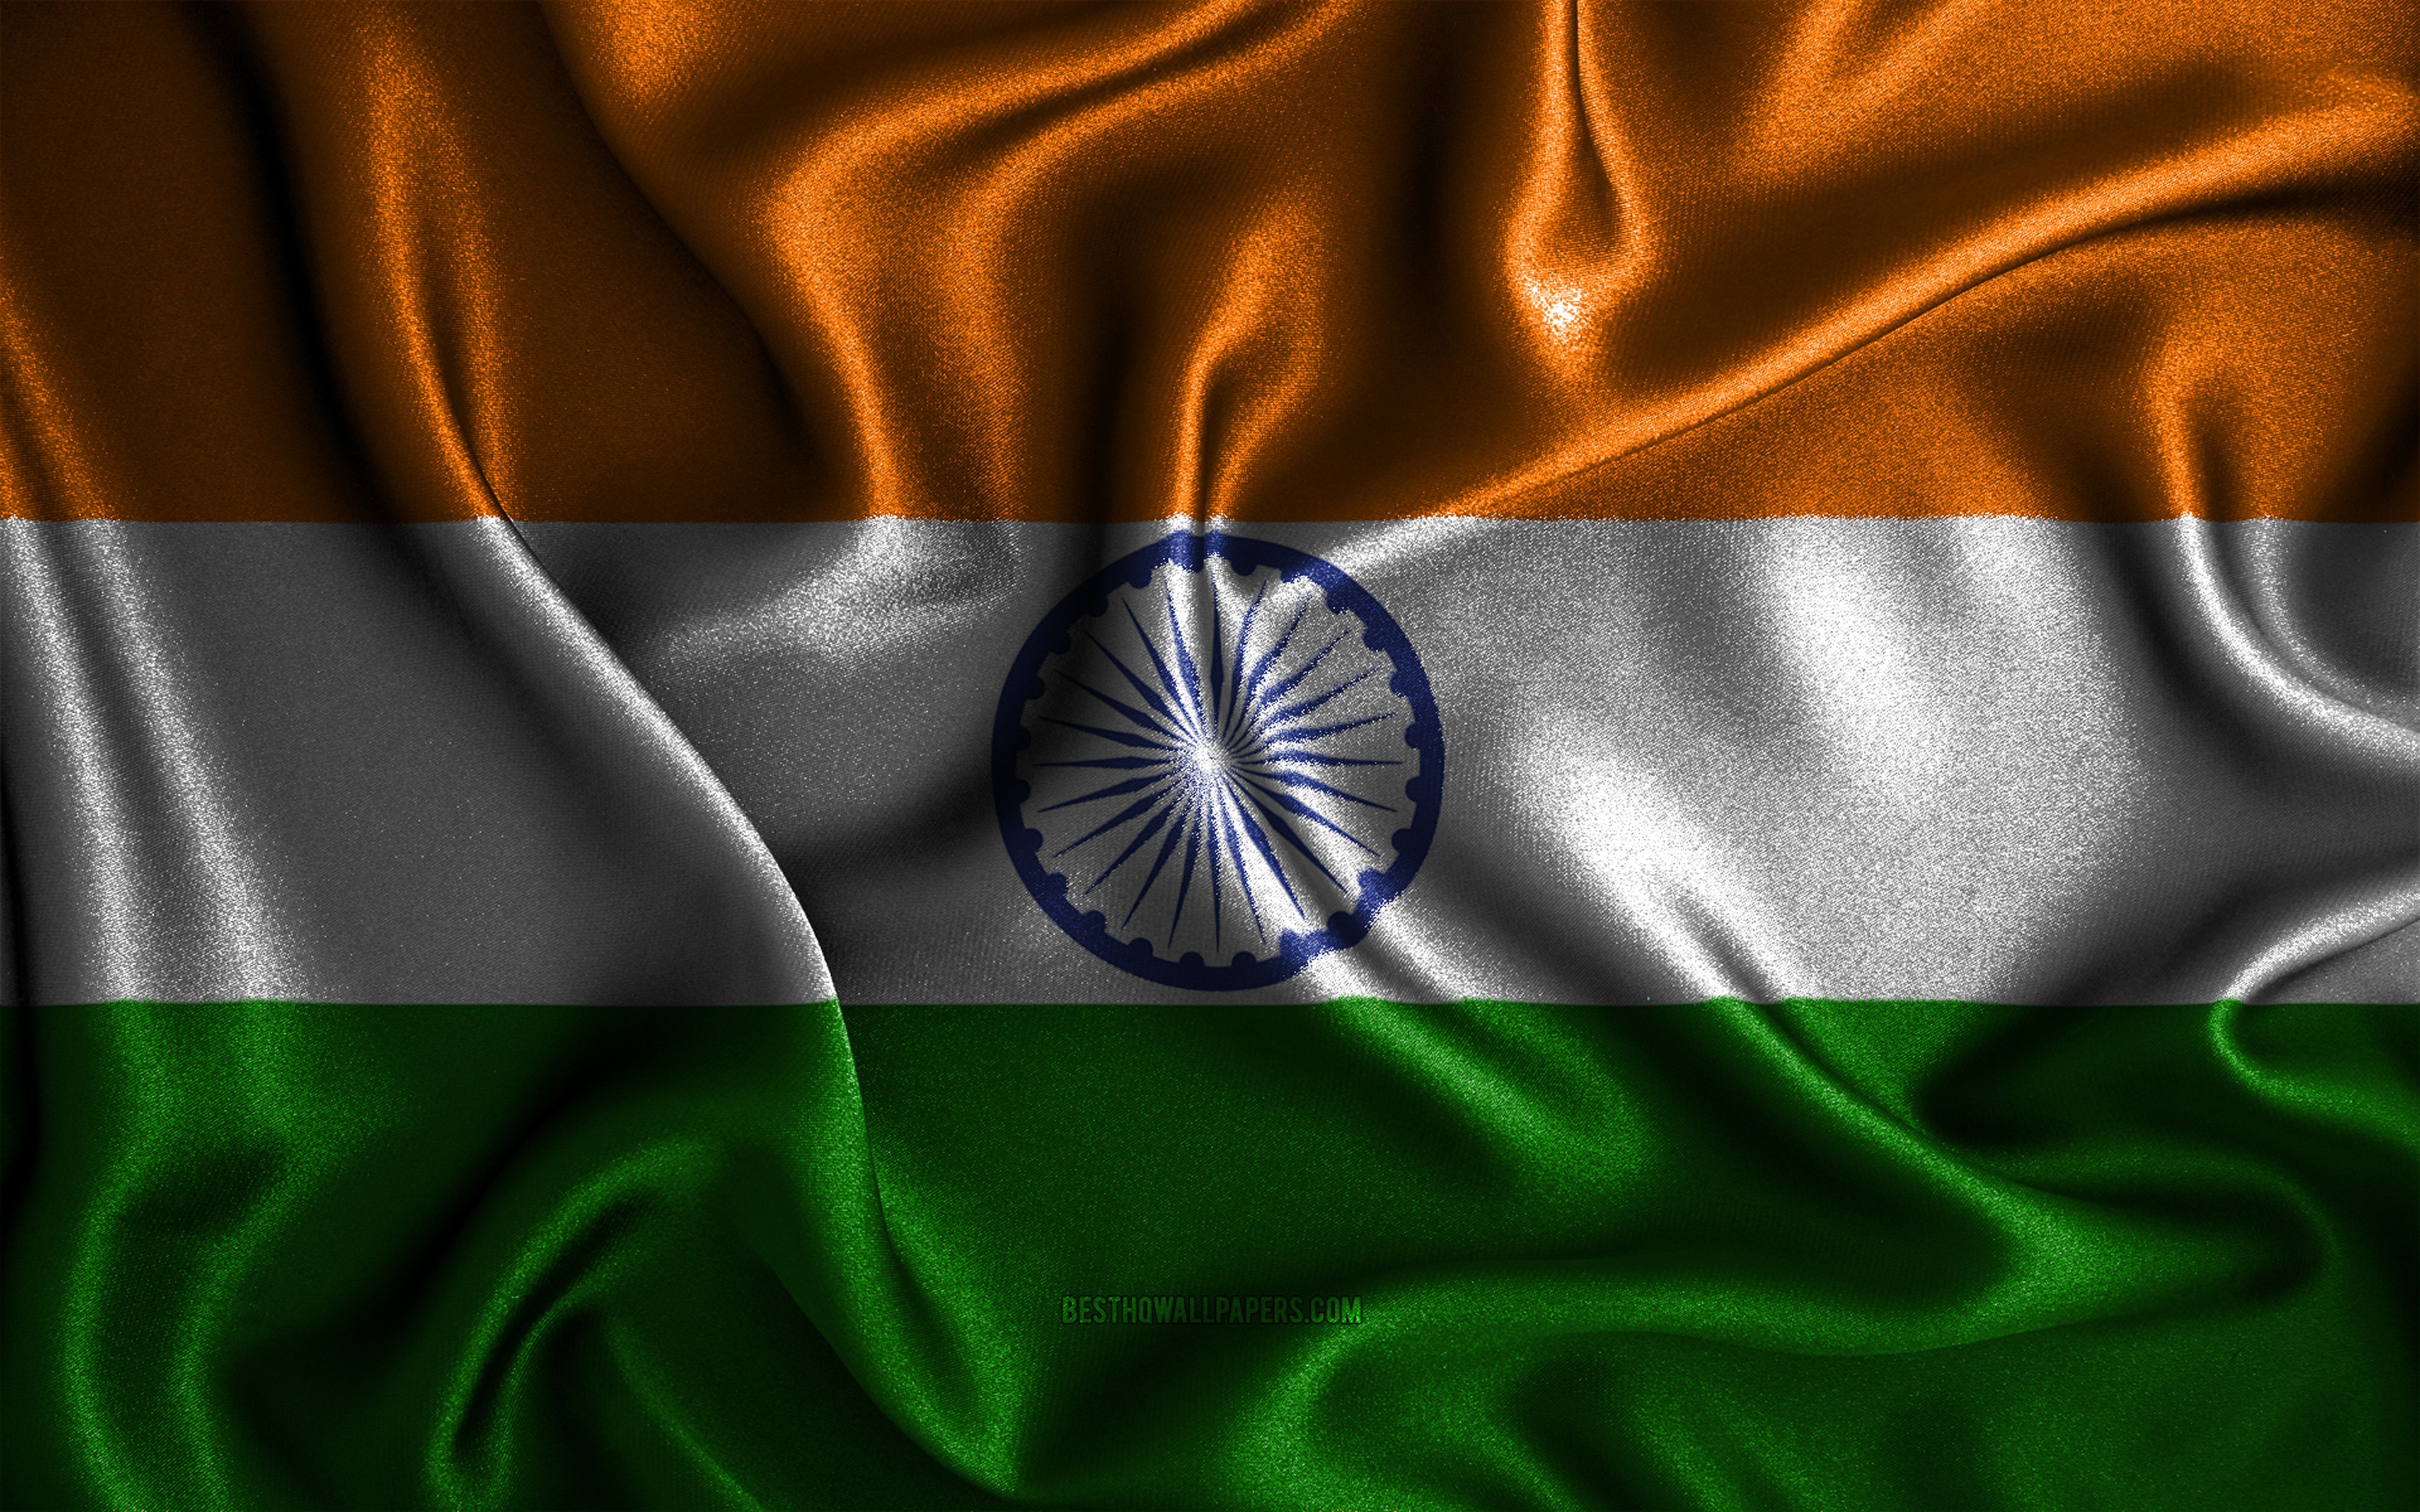 Download wallpapers Indian flag, 4k, silk wavy flags, Asian countries,  national symbols, Flag of India, fabric flags, India flag, 3D art, India,  Asia, India 3D flag for desktop with resolution 3840x2400. High